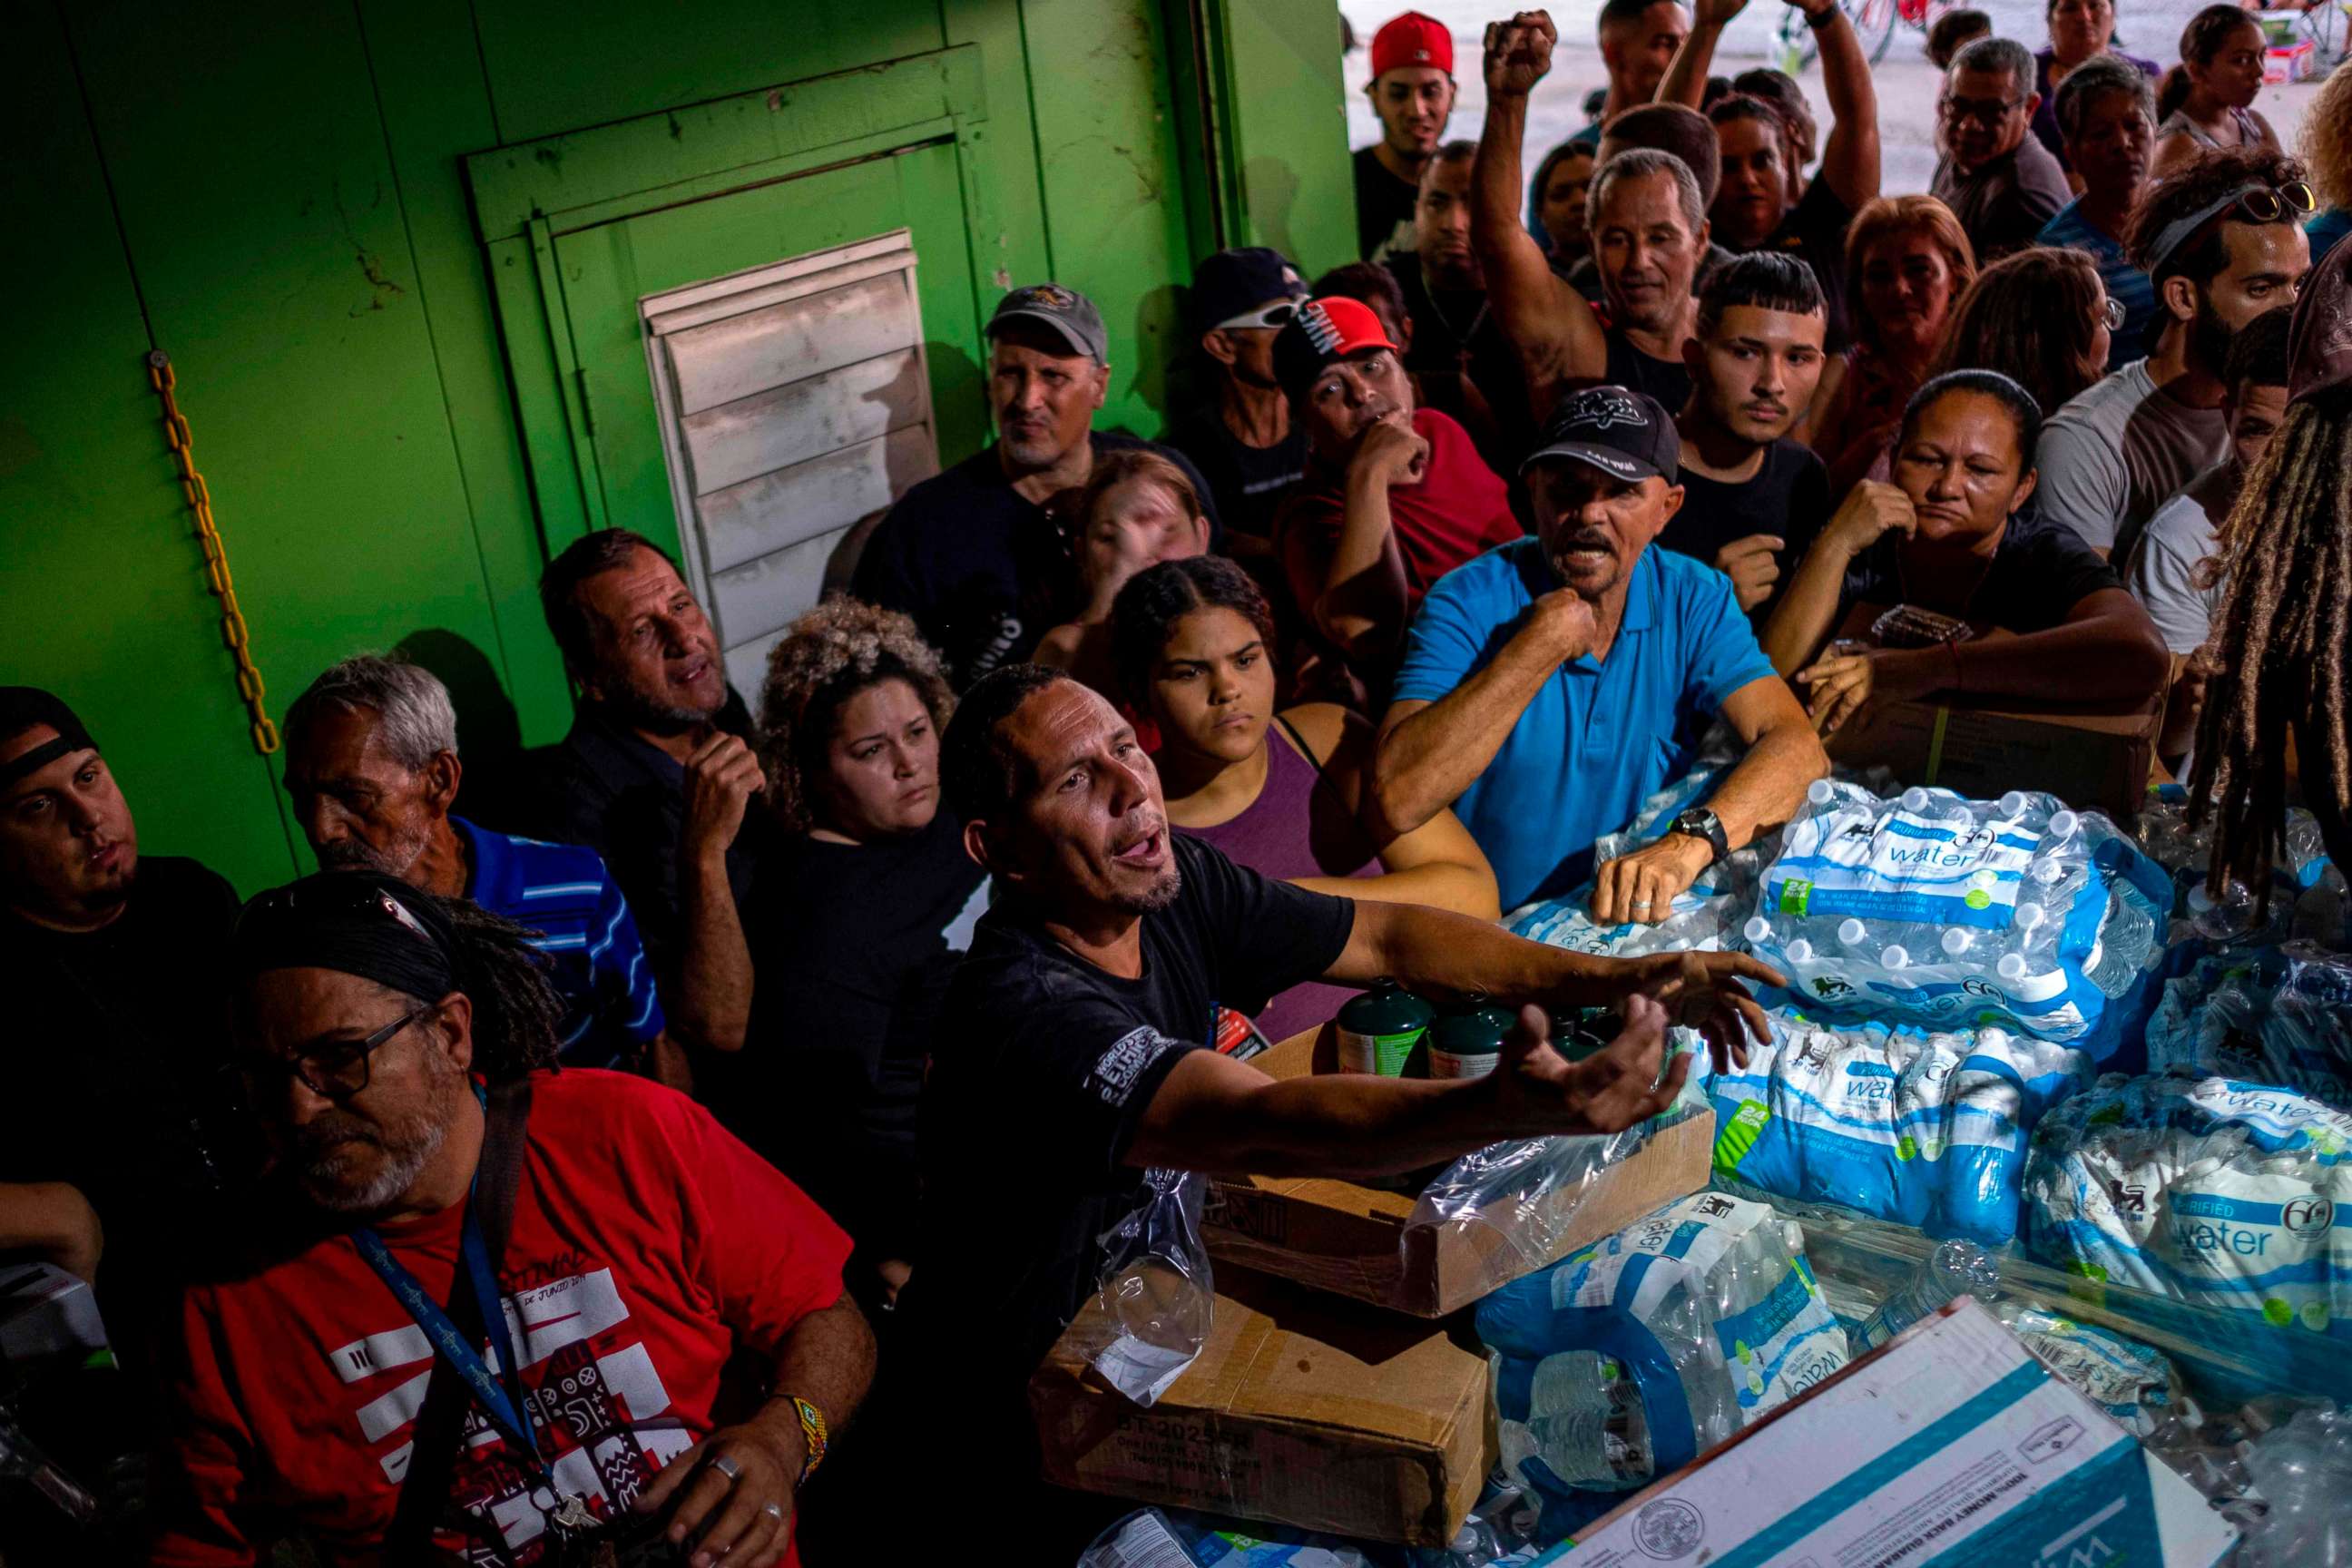 PHOTO: People break into a warehouse with supplies believed to have been from when Hurricane Maria struck the island in 2017 in Ponce, Puerto Rico on Jan. 18, 2020.